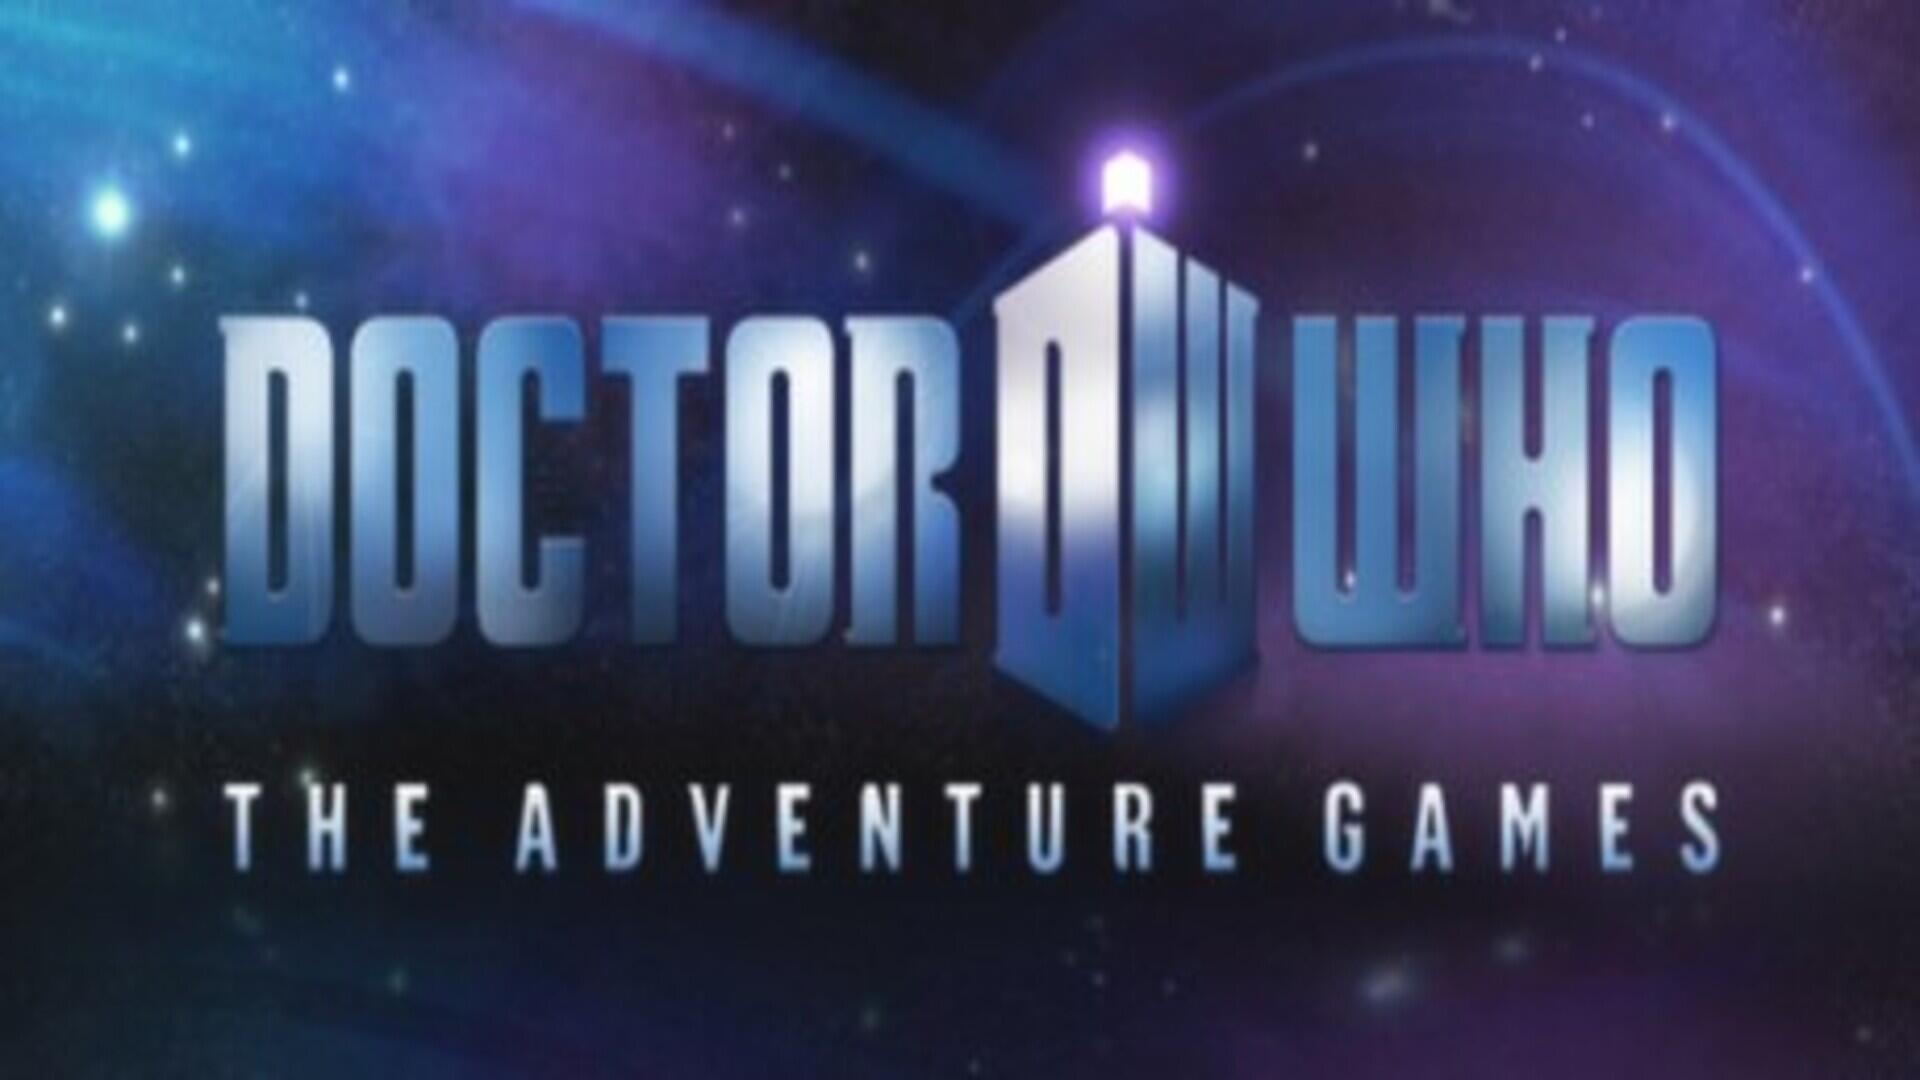 Doctor Who The Adventure Games – Free Download ( Build 8899267 )